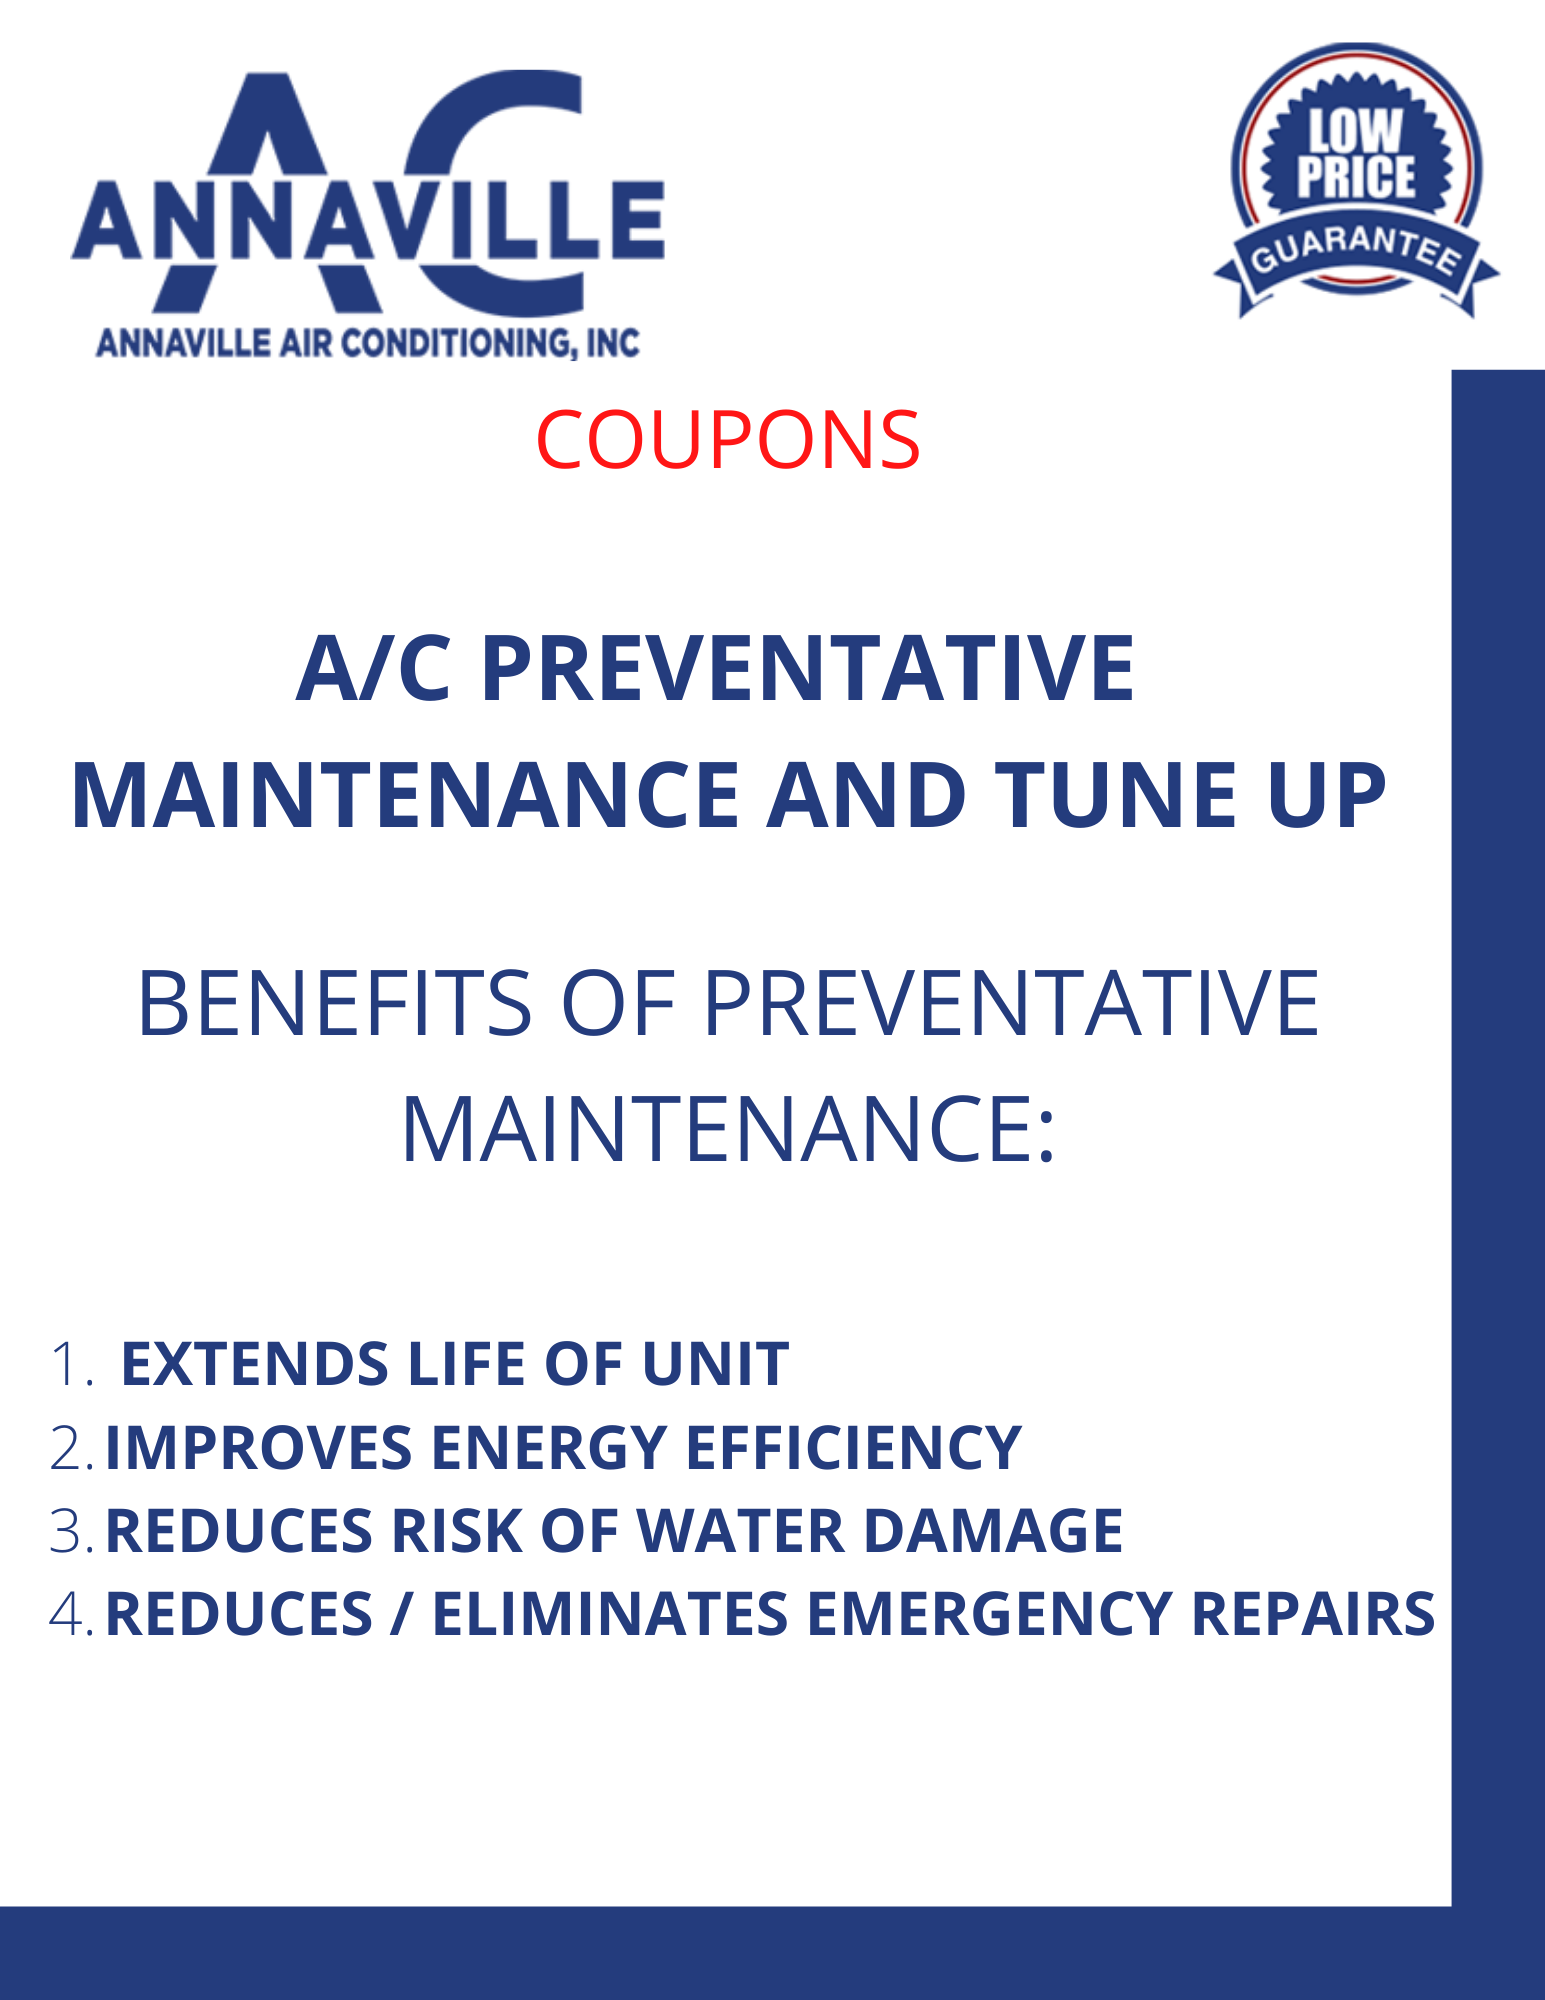 A_C PREVENTATIVE MAINTENANCE AND TUNE UP